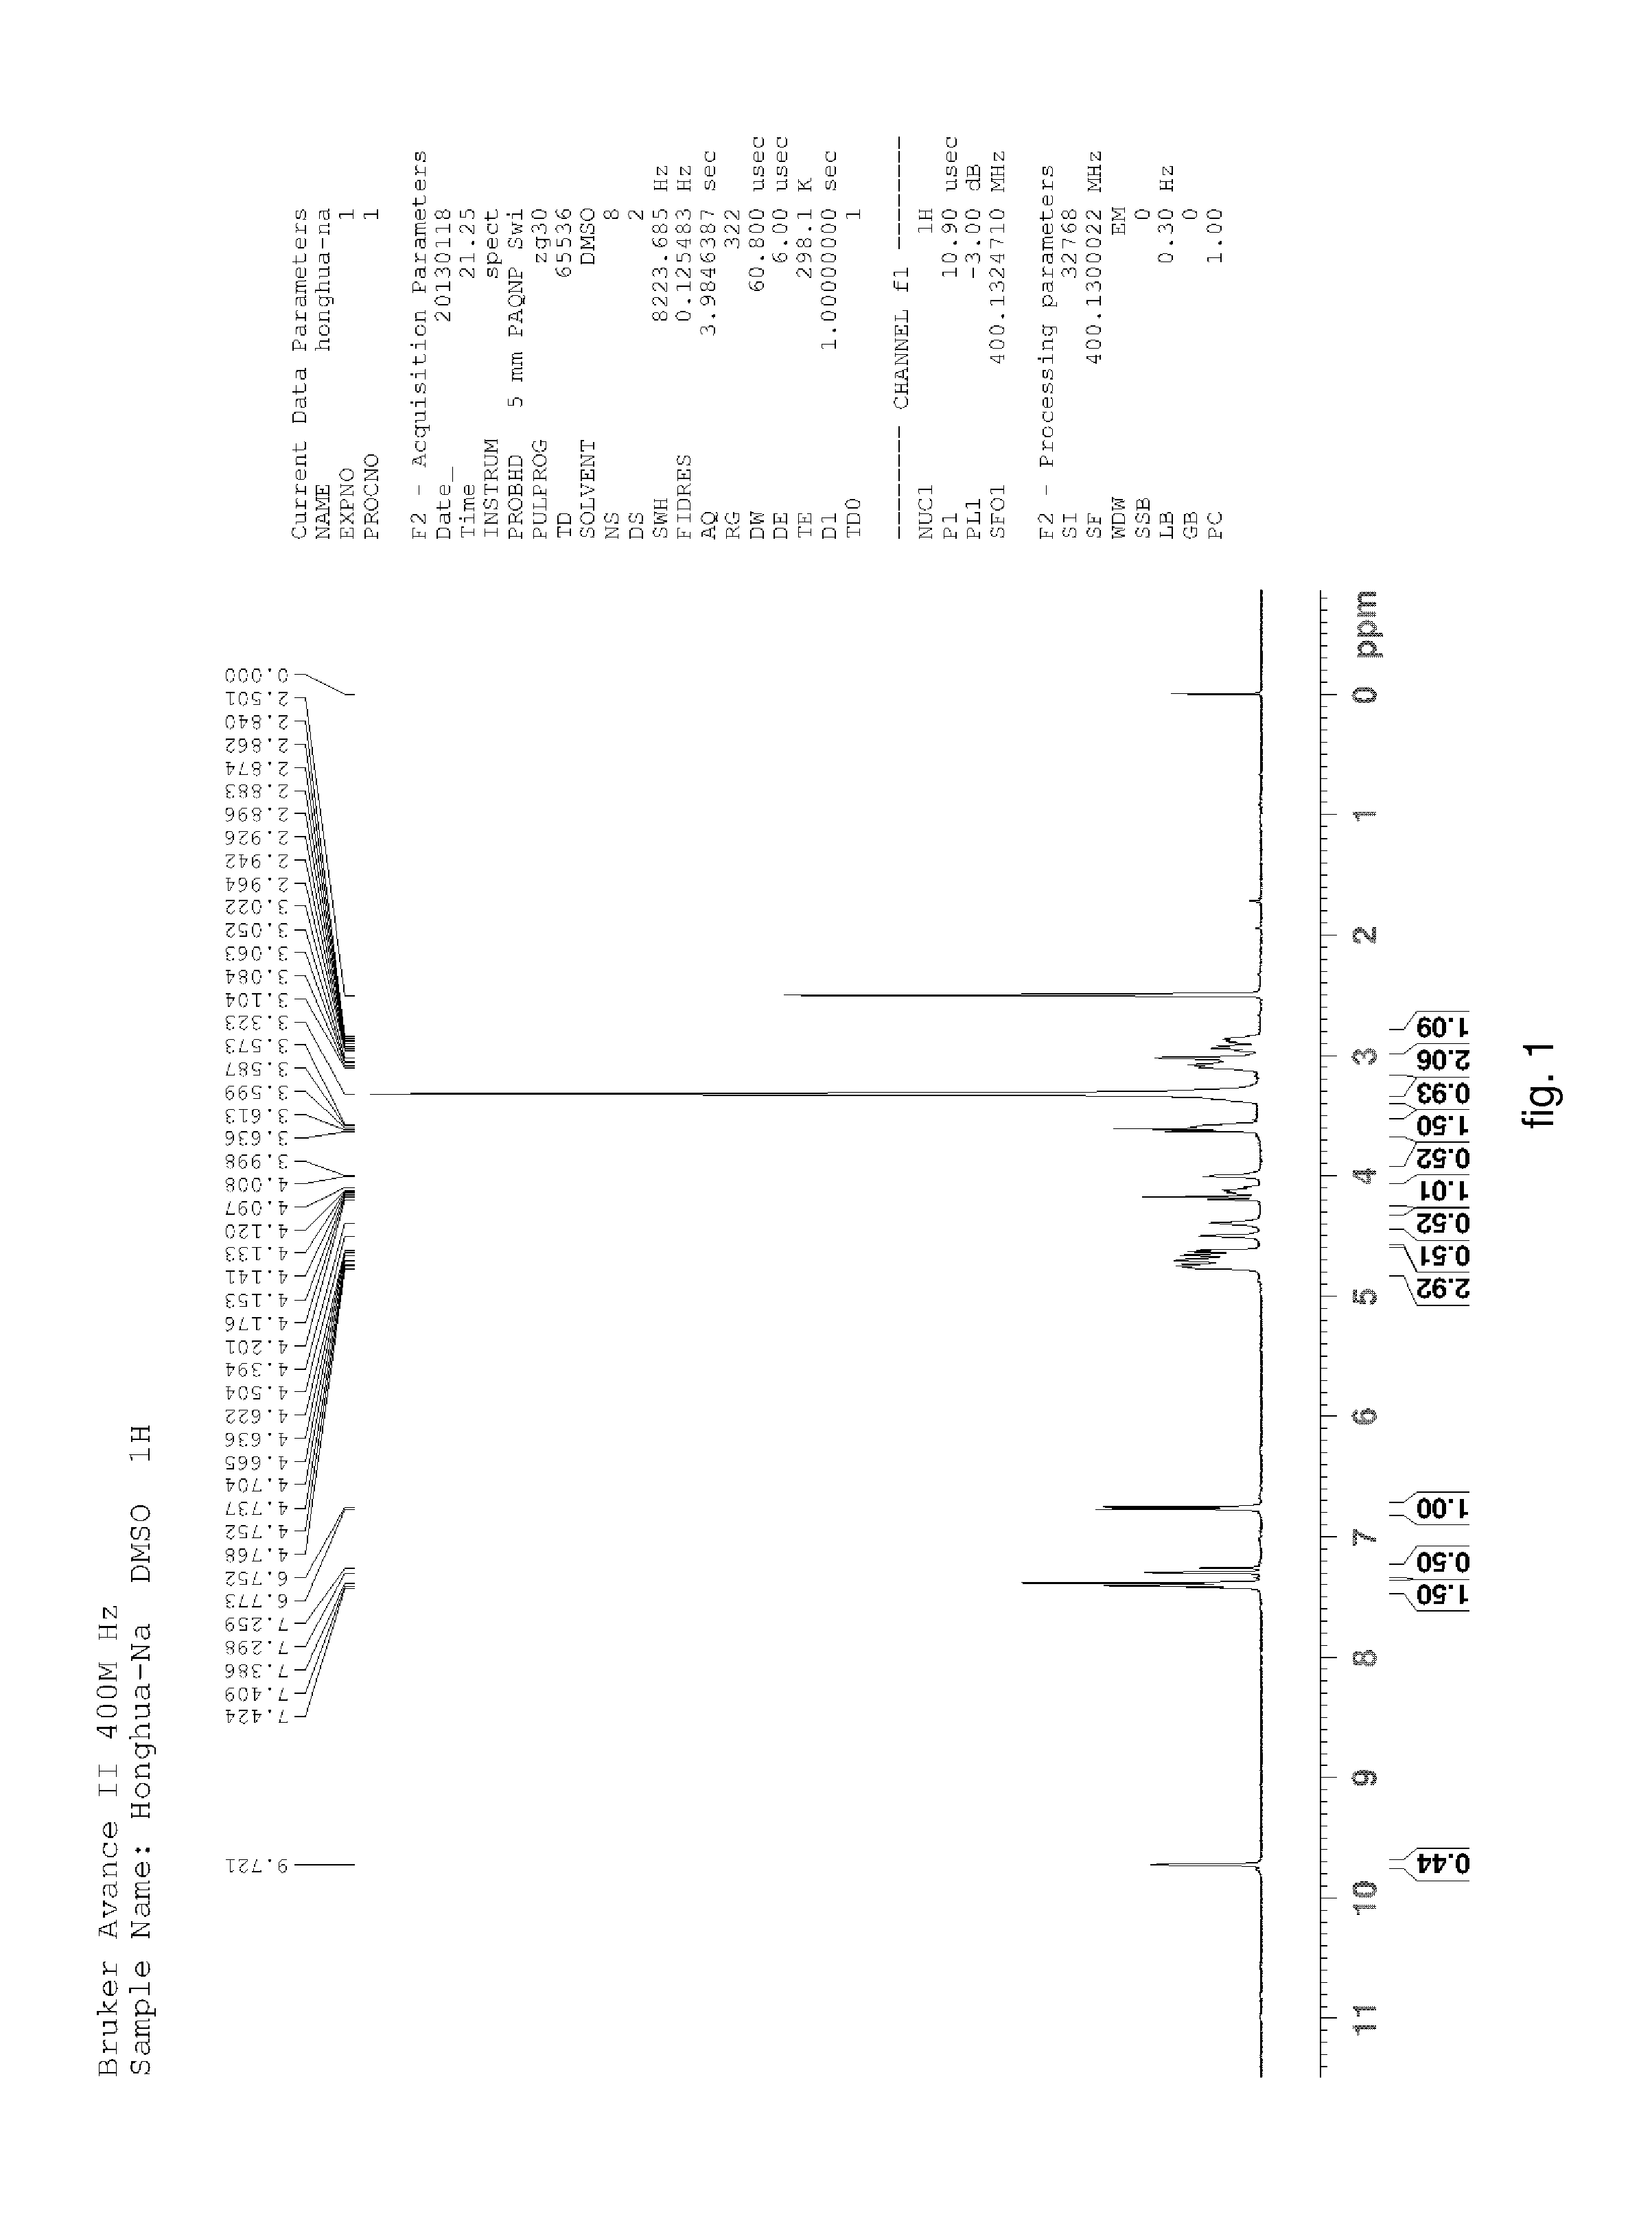 Hydroxysafflor yellow A sodium and preparation as well as application thereof